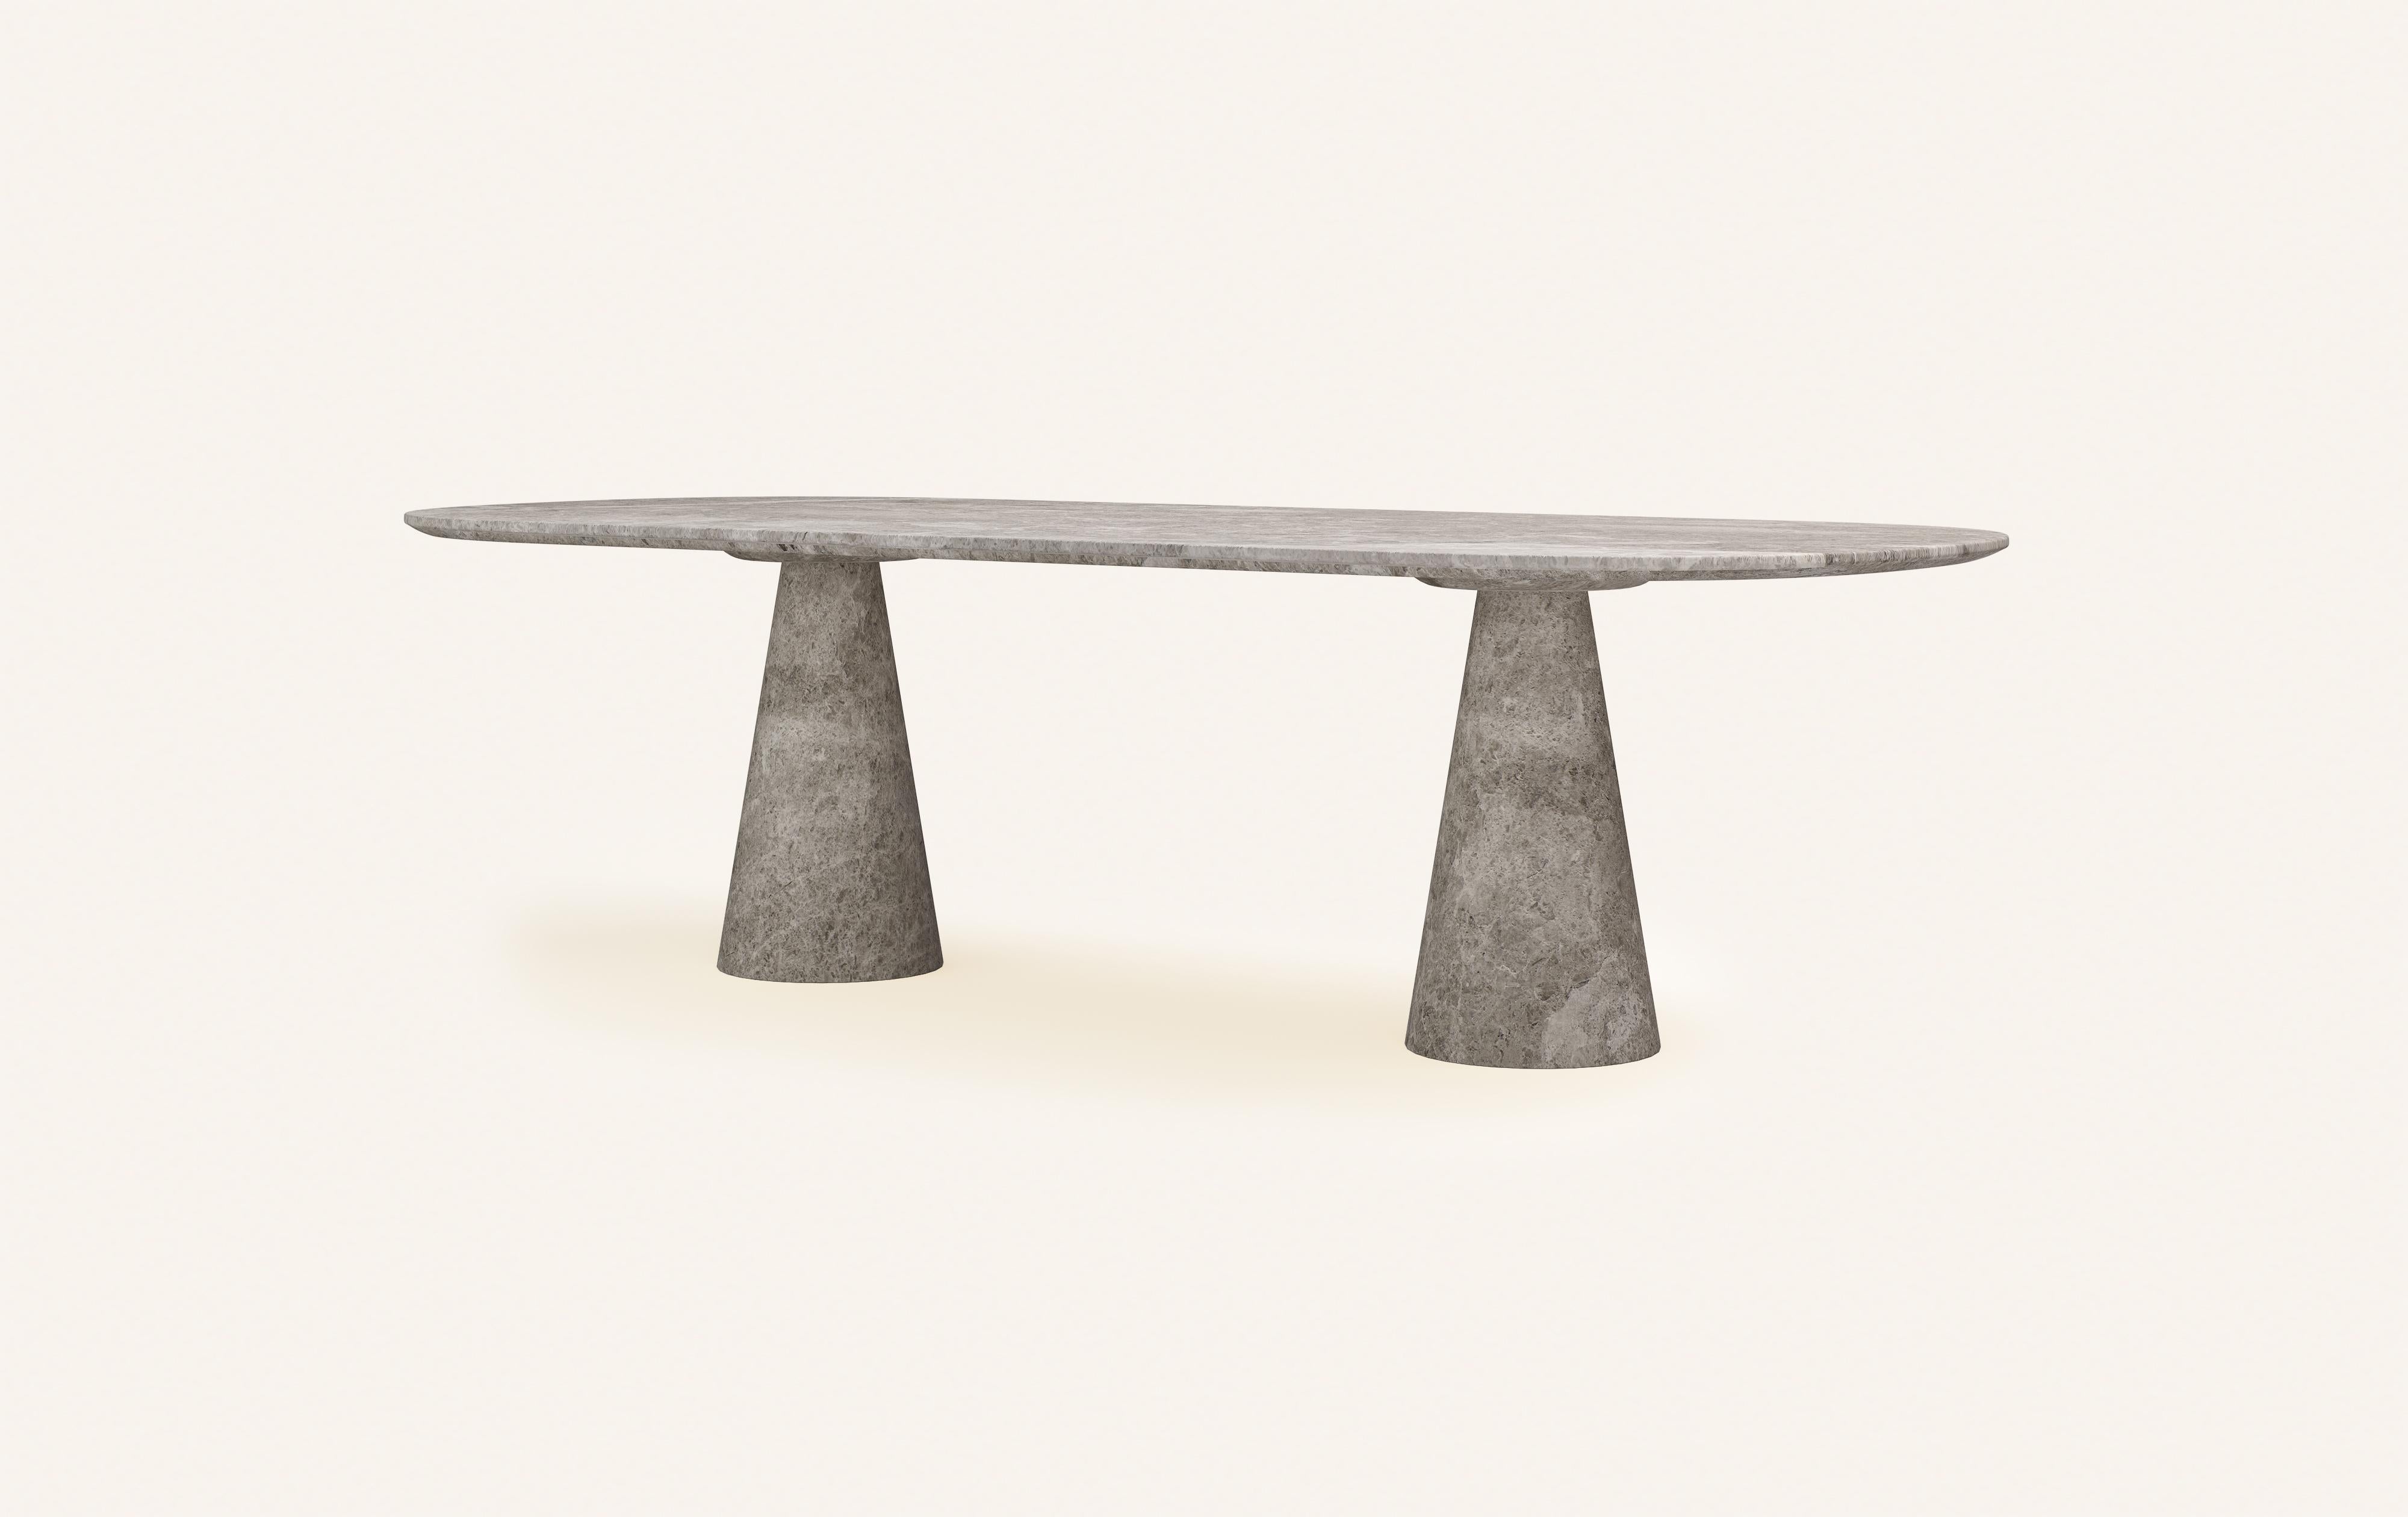 Organic Modern FORM(LA) Cono Oval Dining Table 118”L x 48”W x 30”H Tundra Gray Marble For Sale